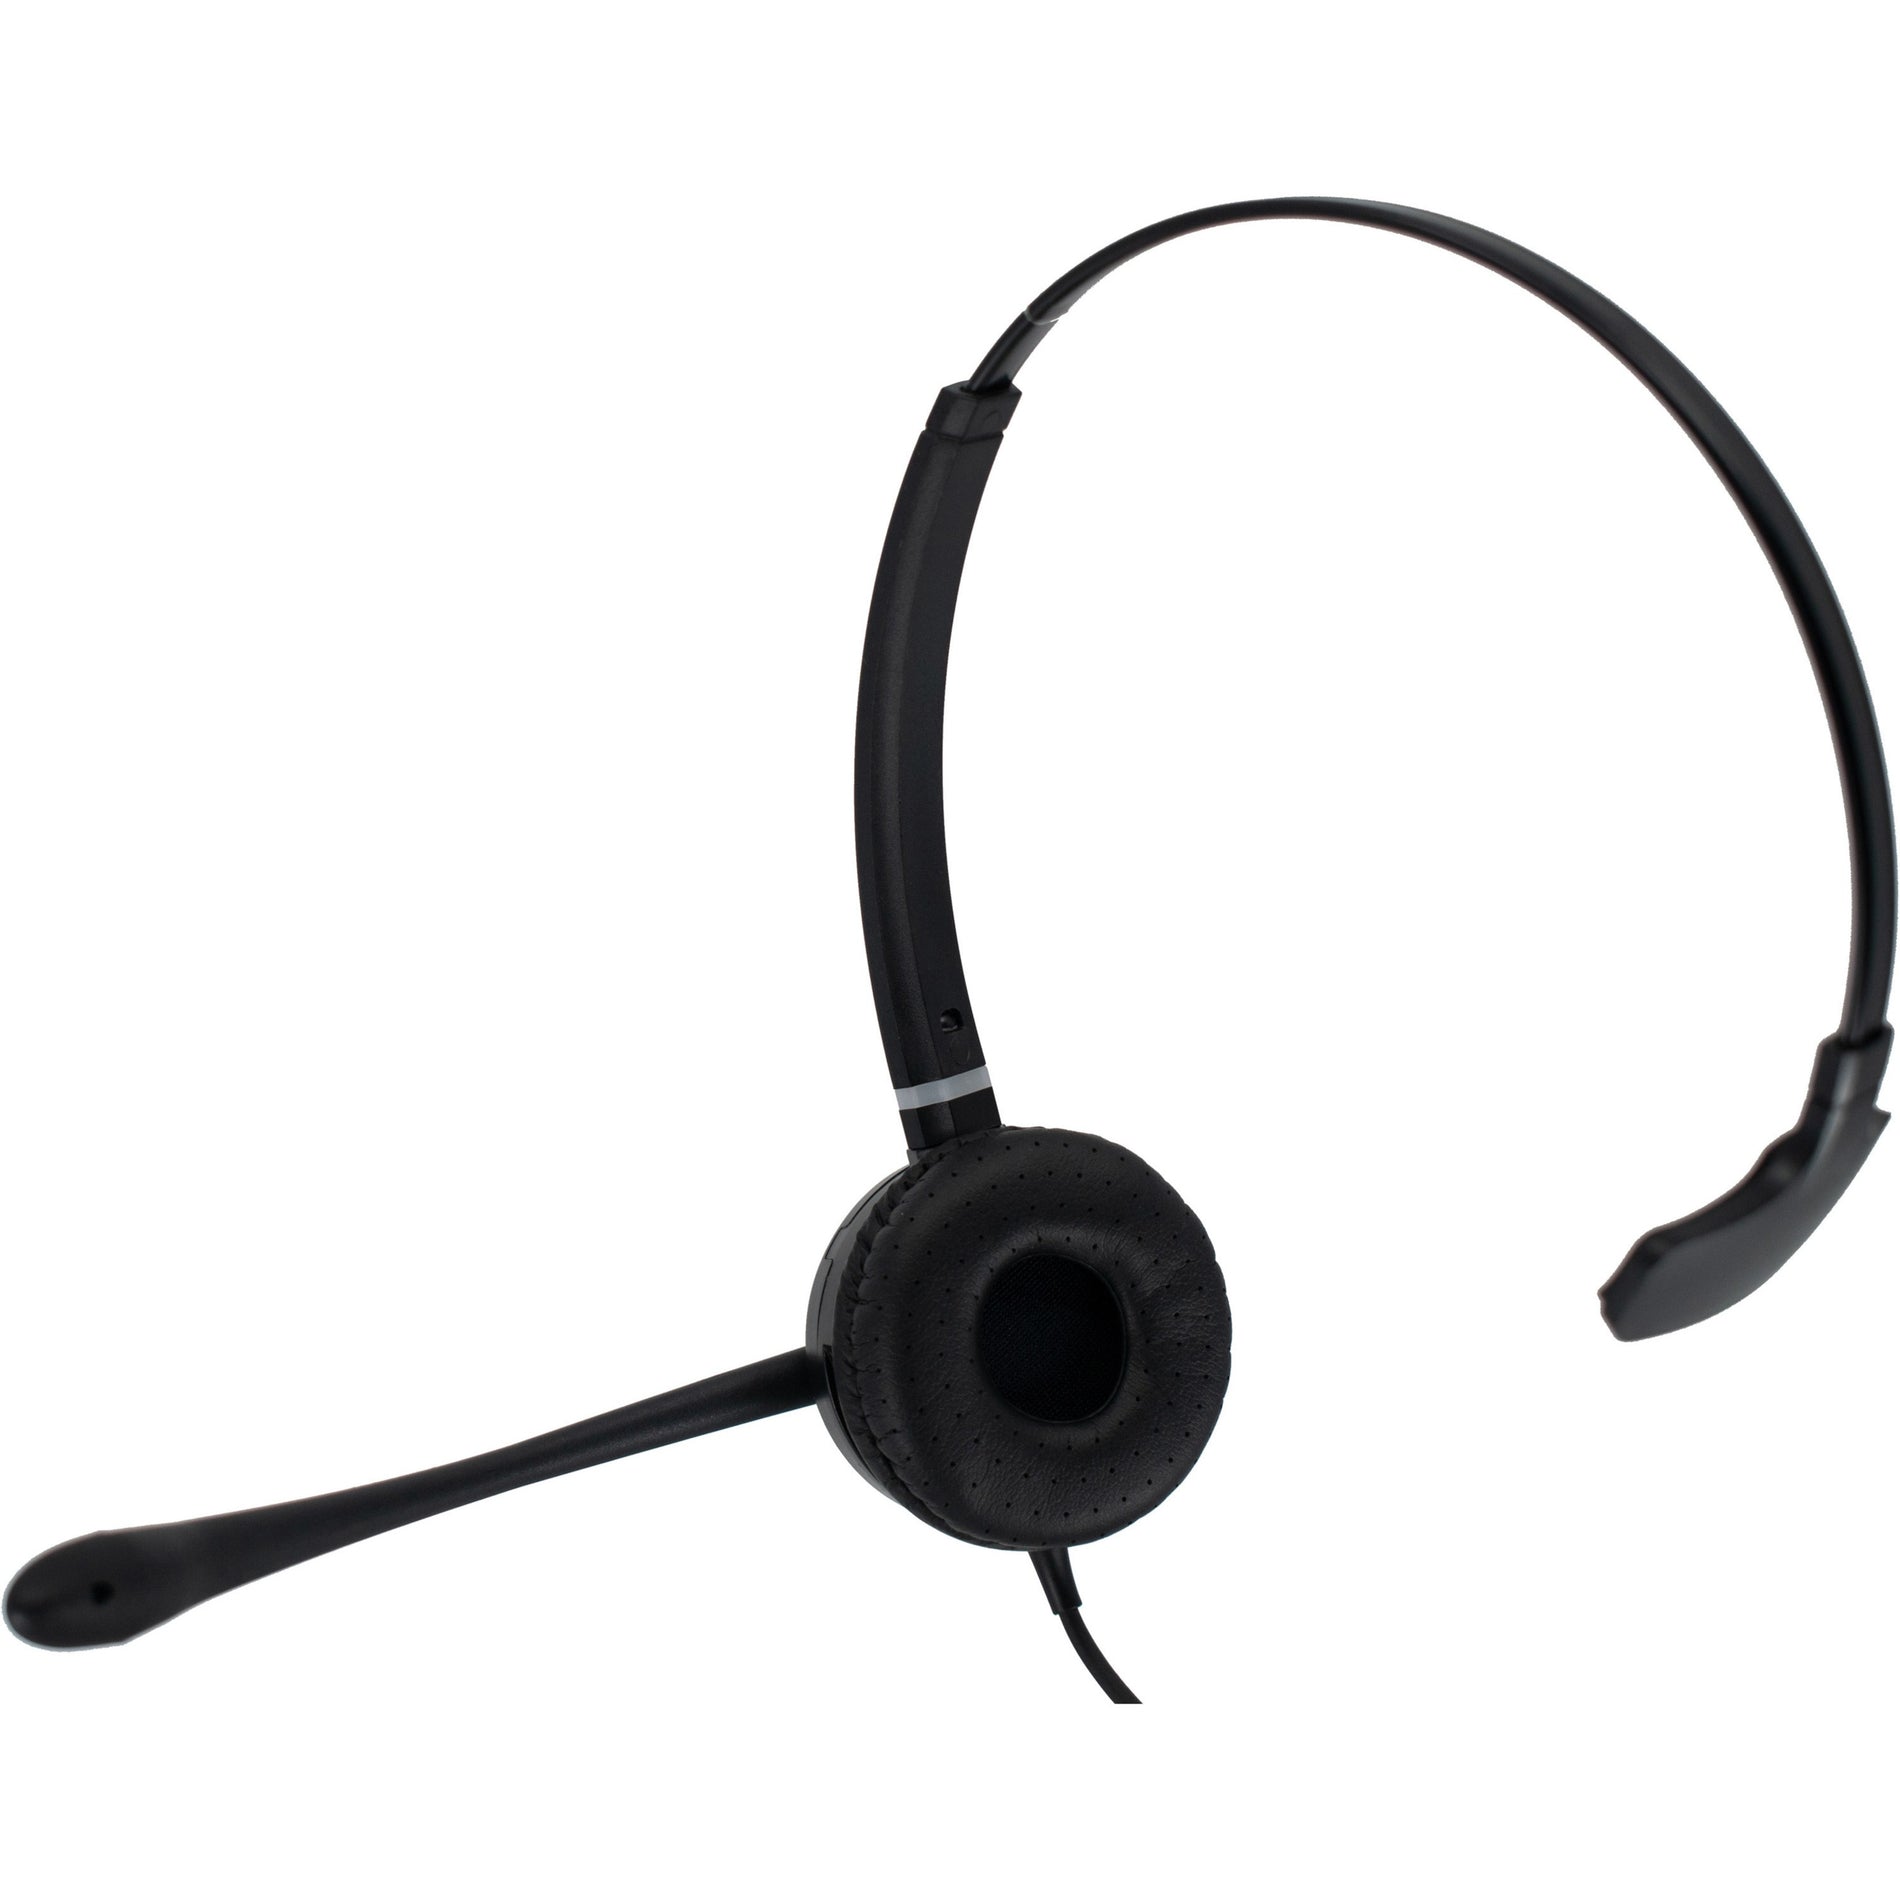 Spracht HS-WD-USB-1 Headset, Mono Sound, Noise Canceling, USB Wired